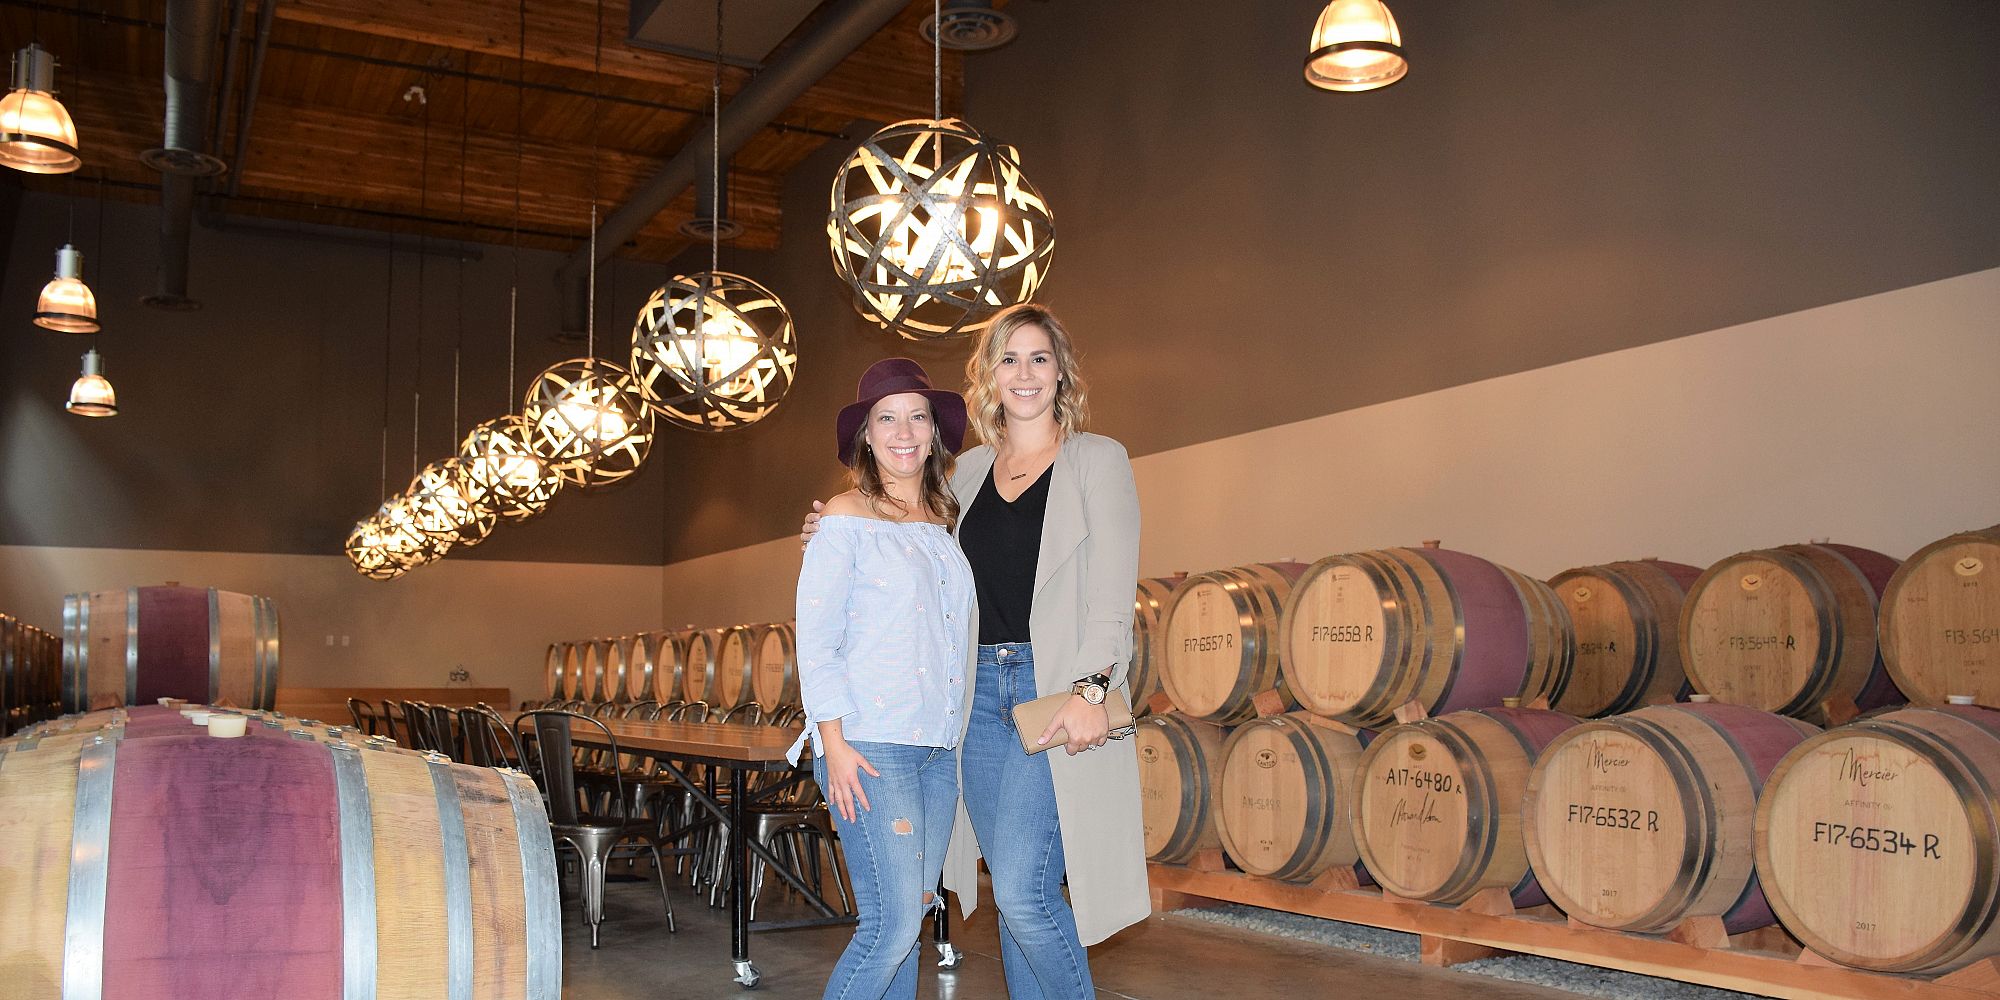 Two Ladies Standing Next To Oak Wine Barrels In The Sandhill Estate Winery Cellar